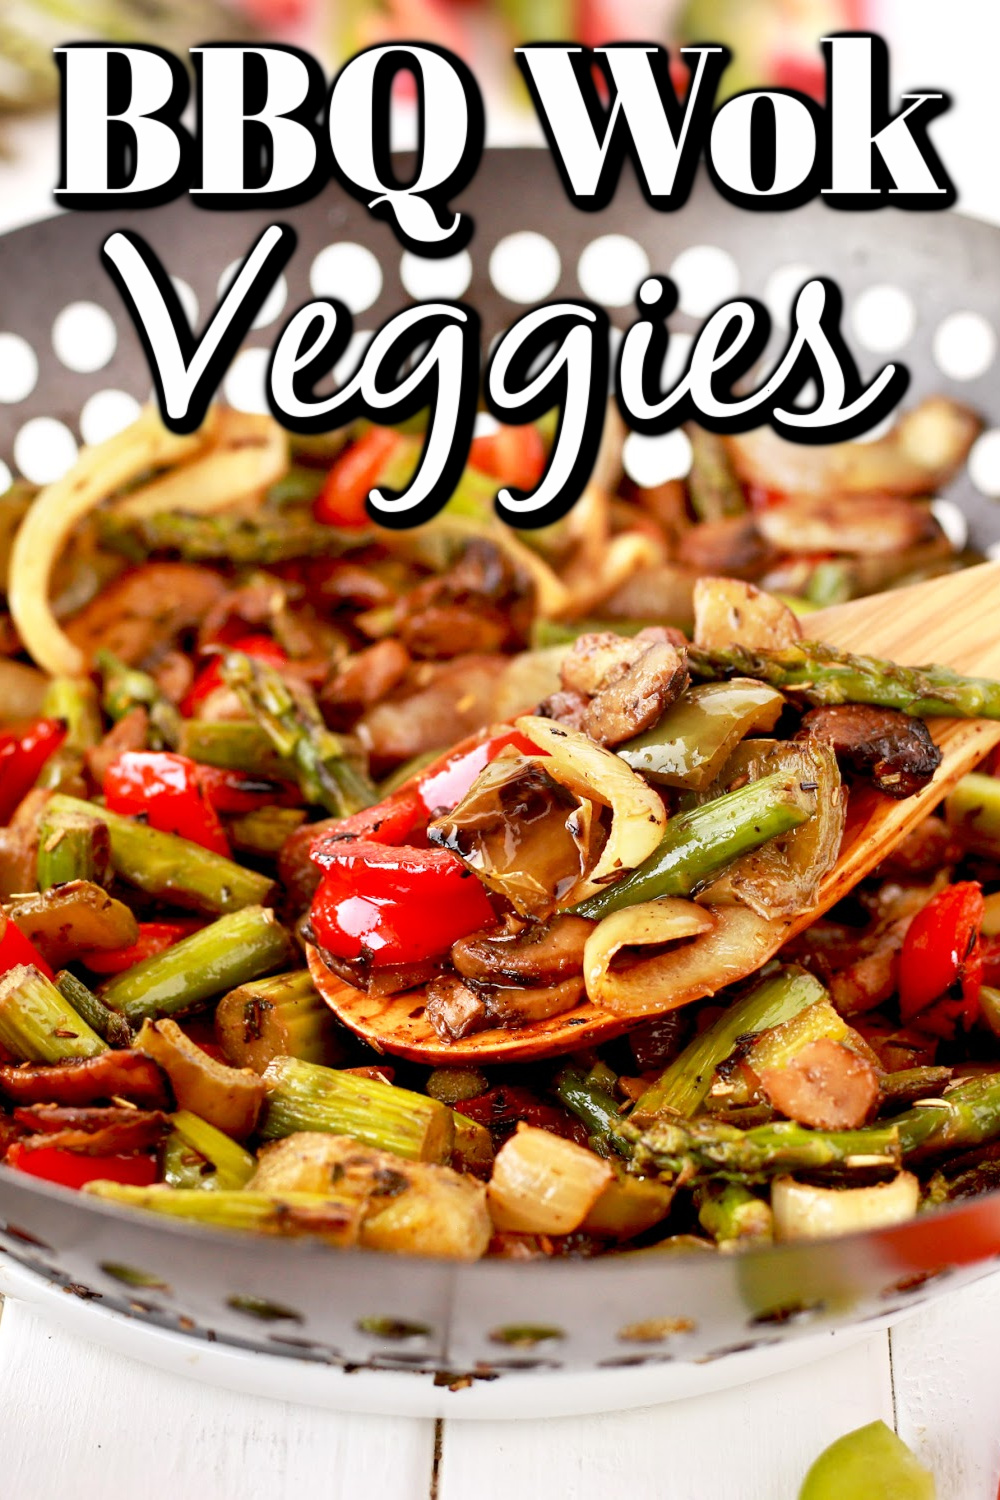 BBQ Wok Veggies are the perfect way to cook up your favorite vegetables!